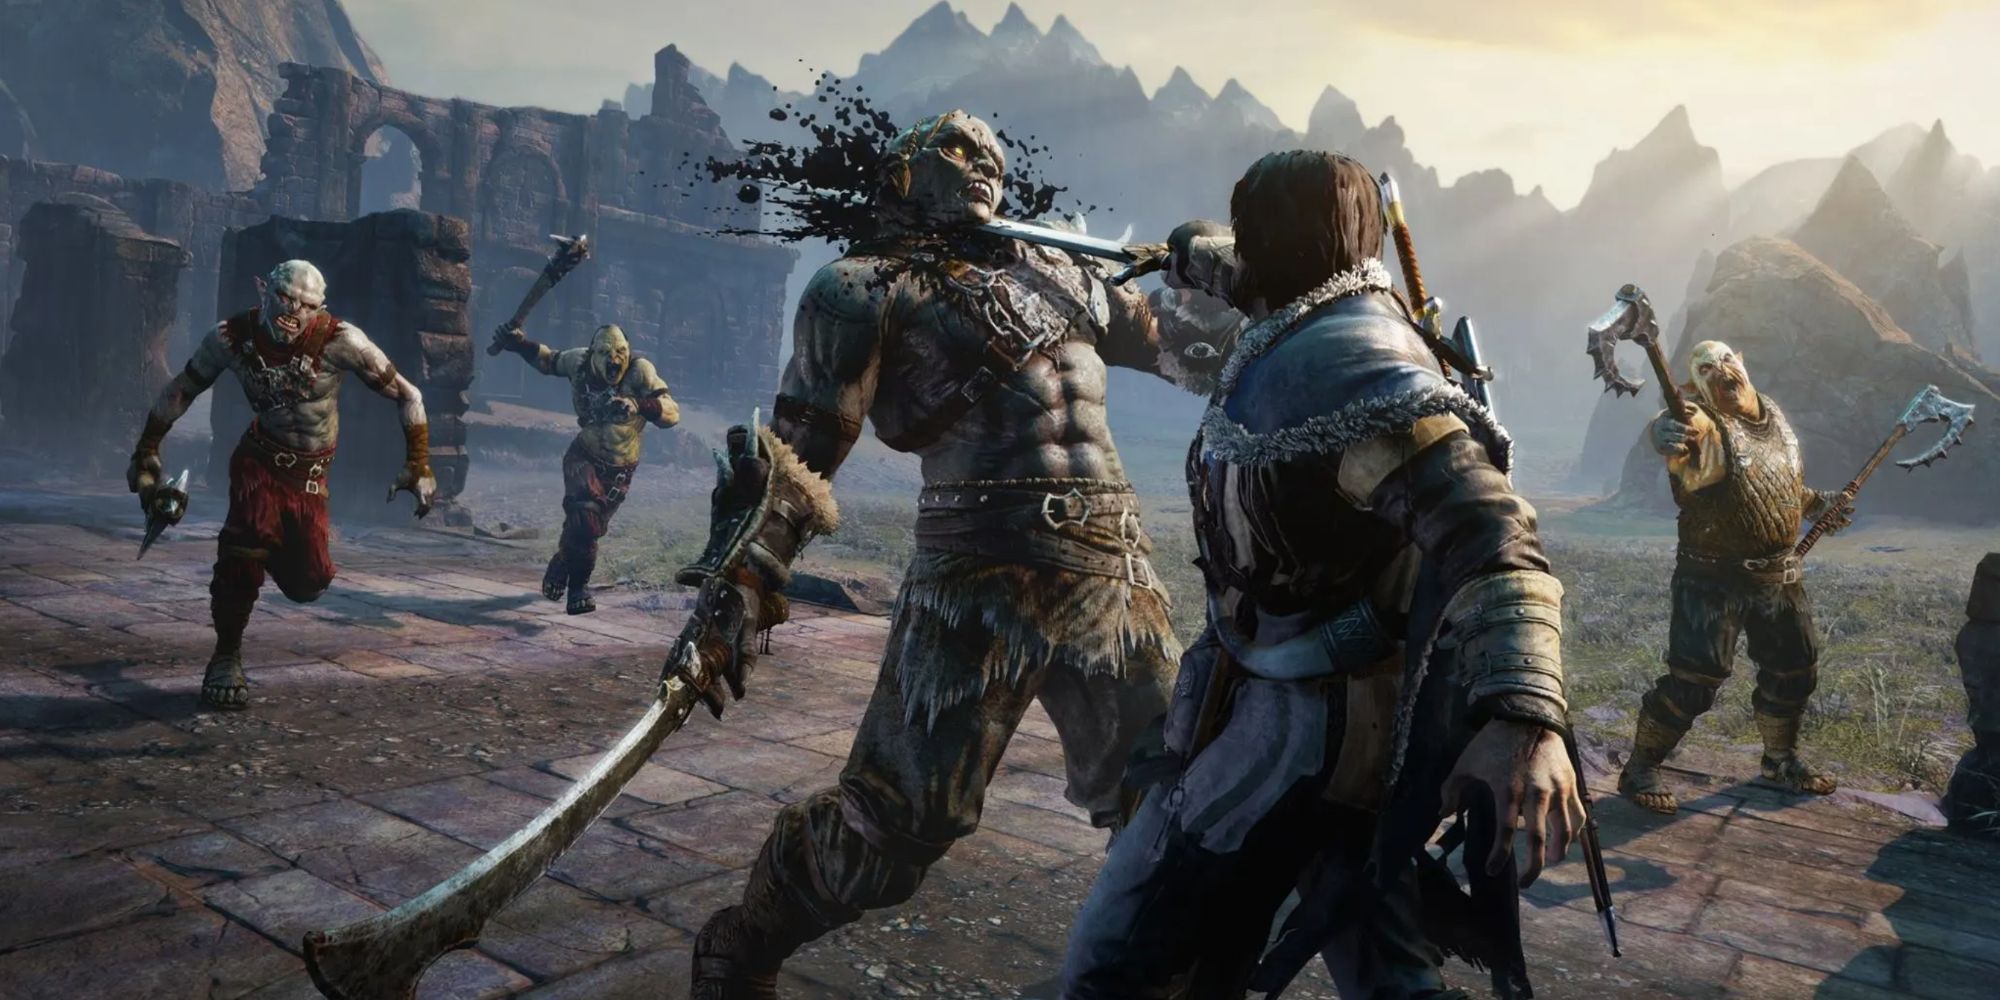 talion stabbing an orc with a sword